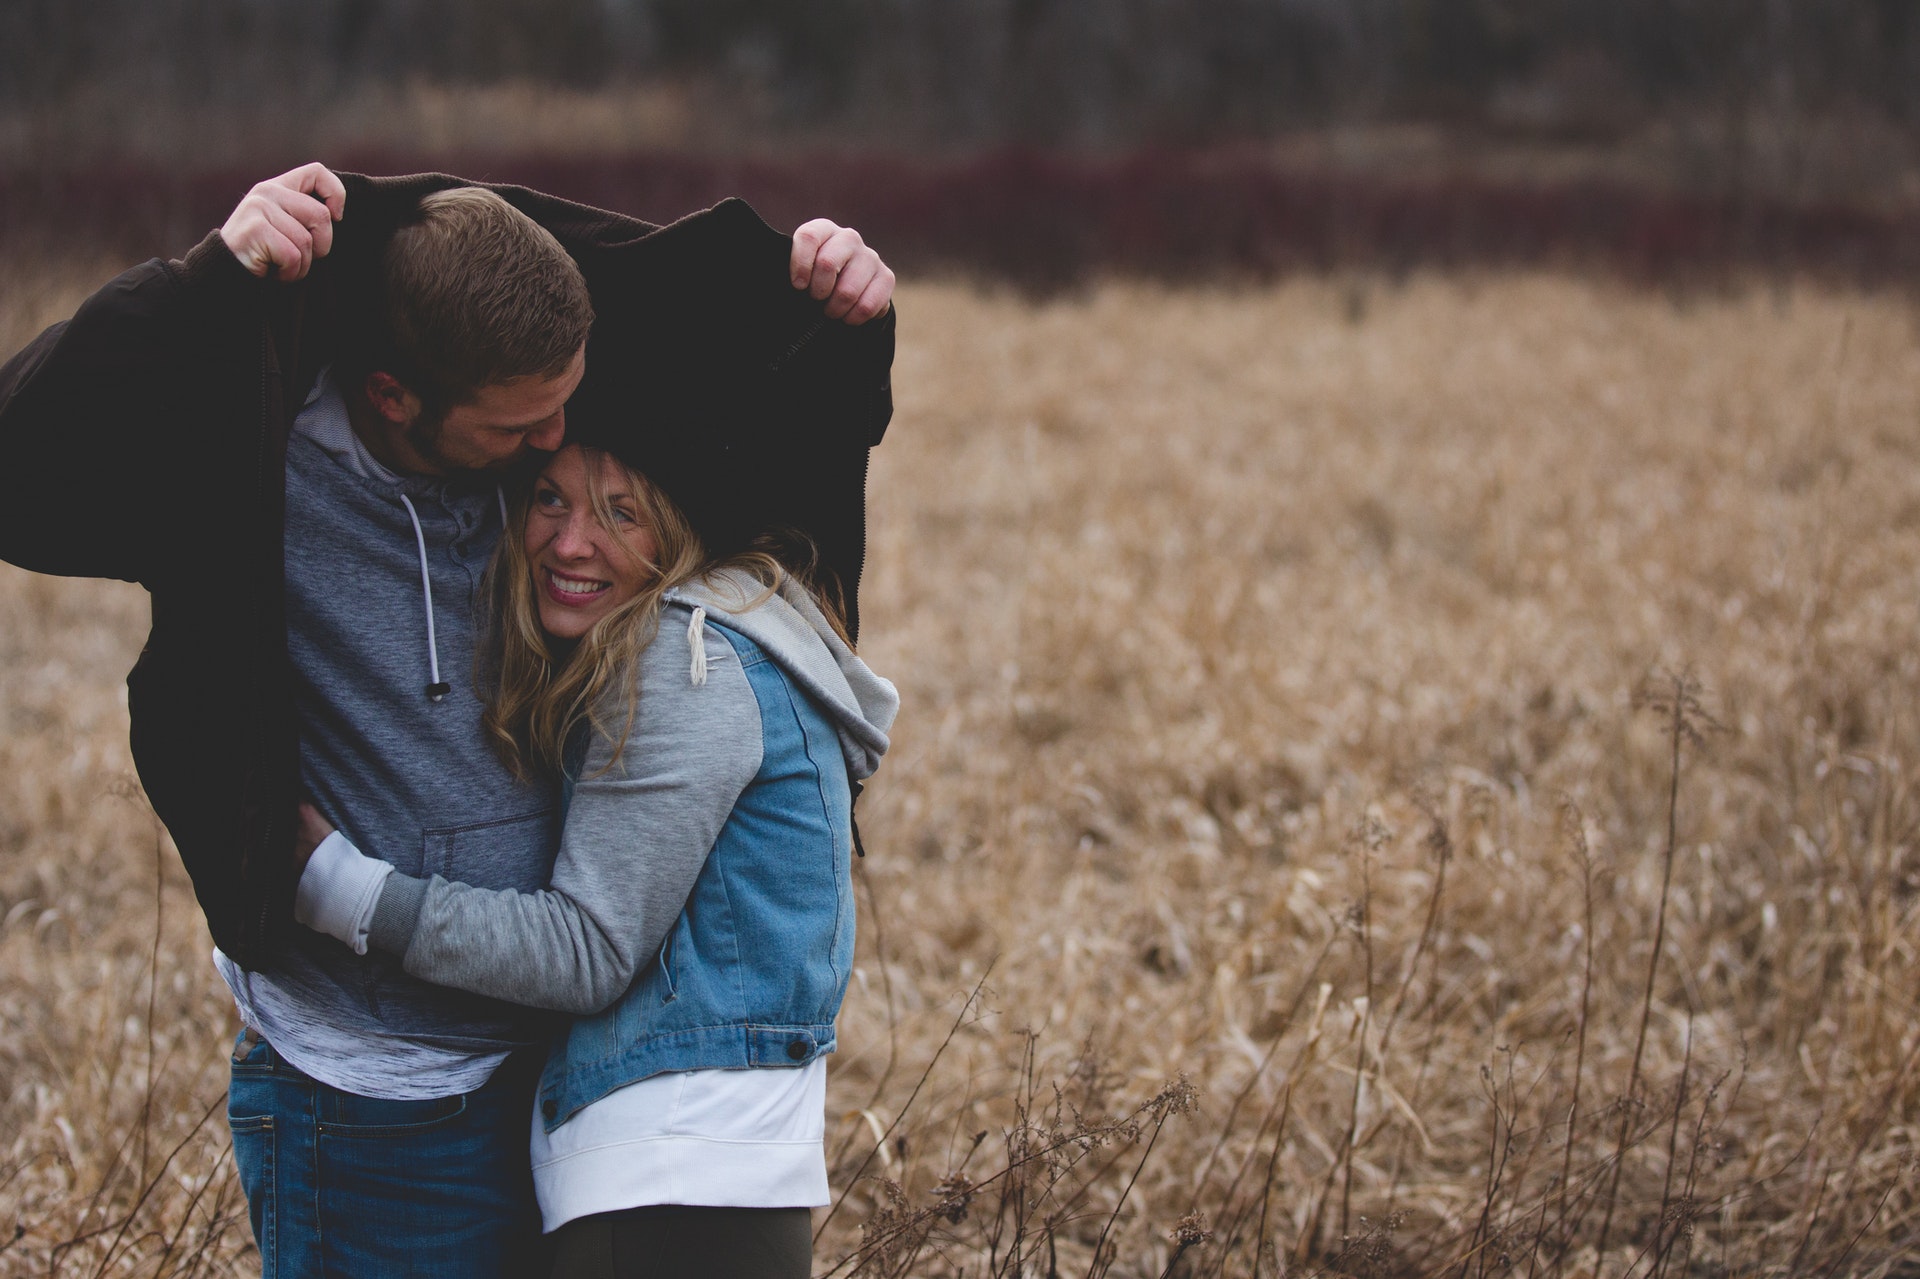 photo-of-couple-at-the-field-853407